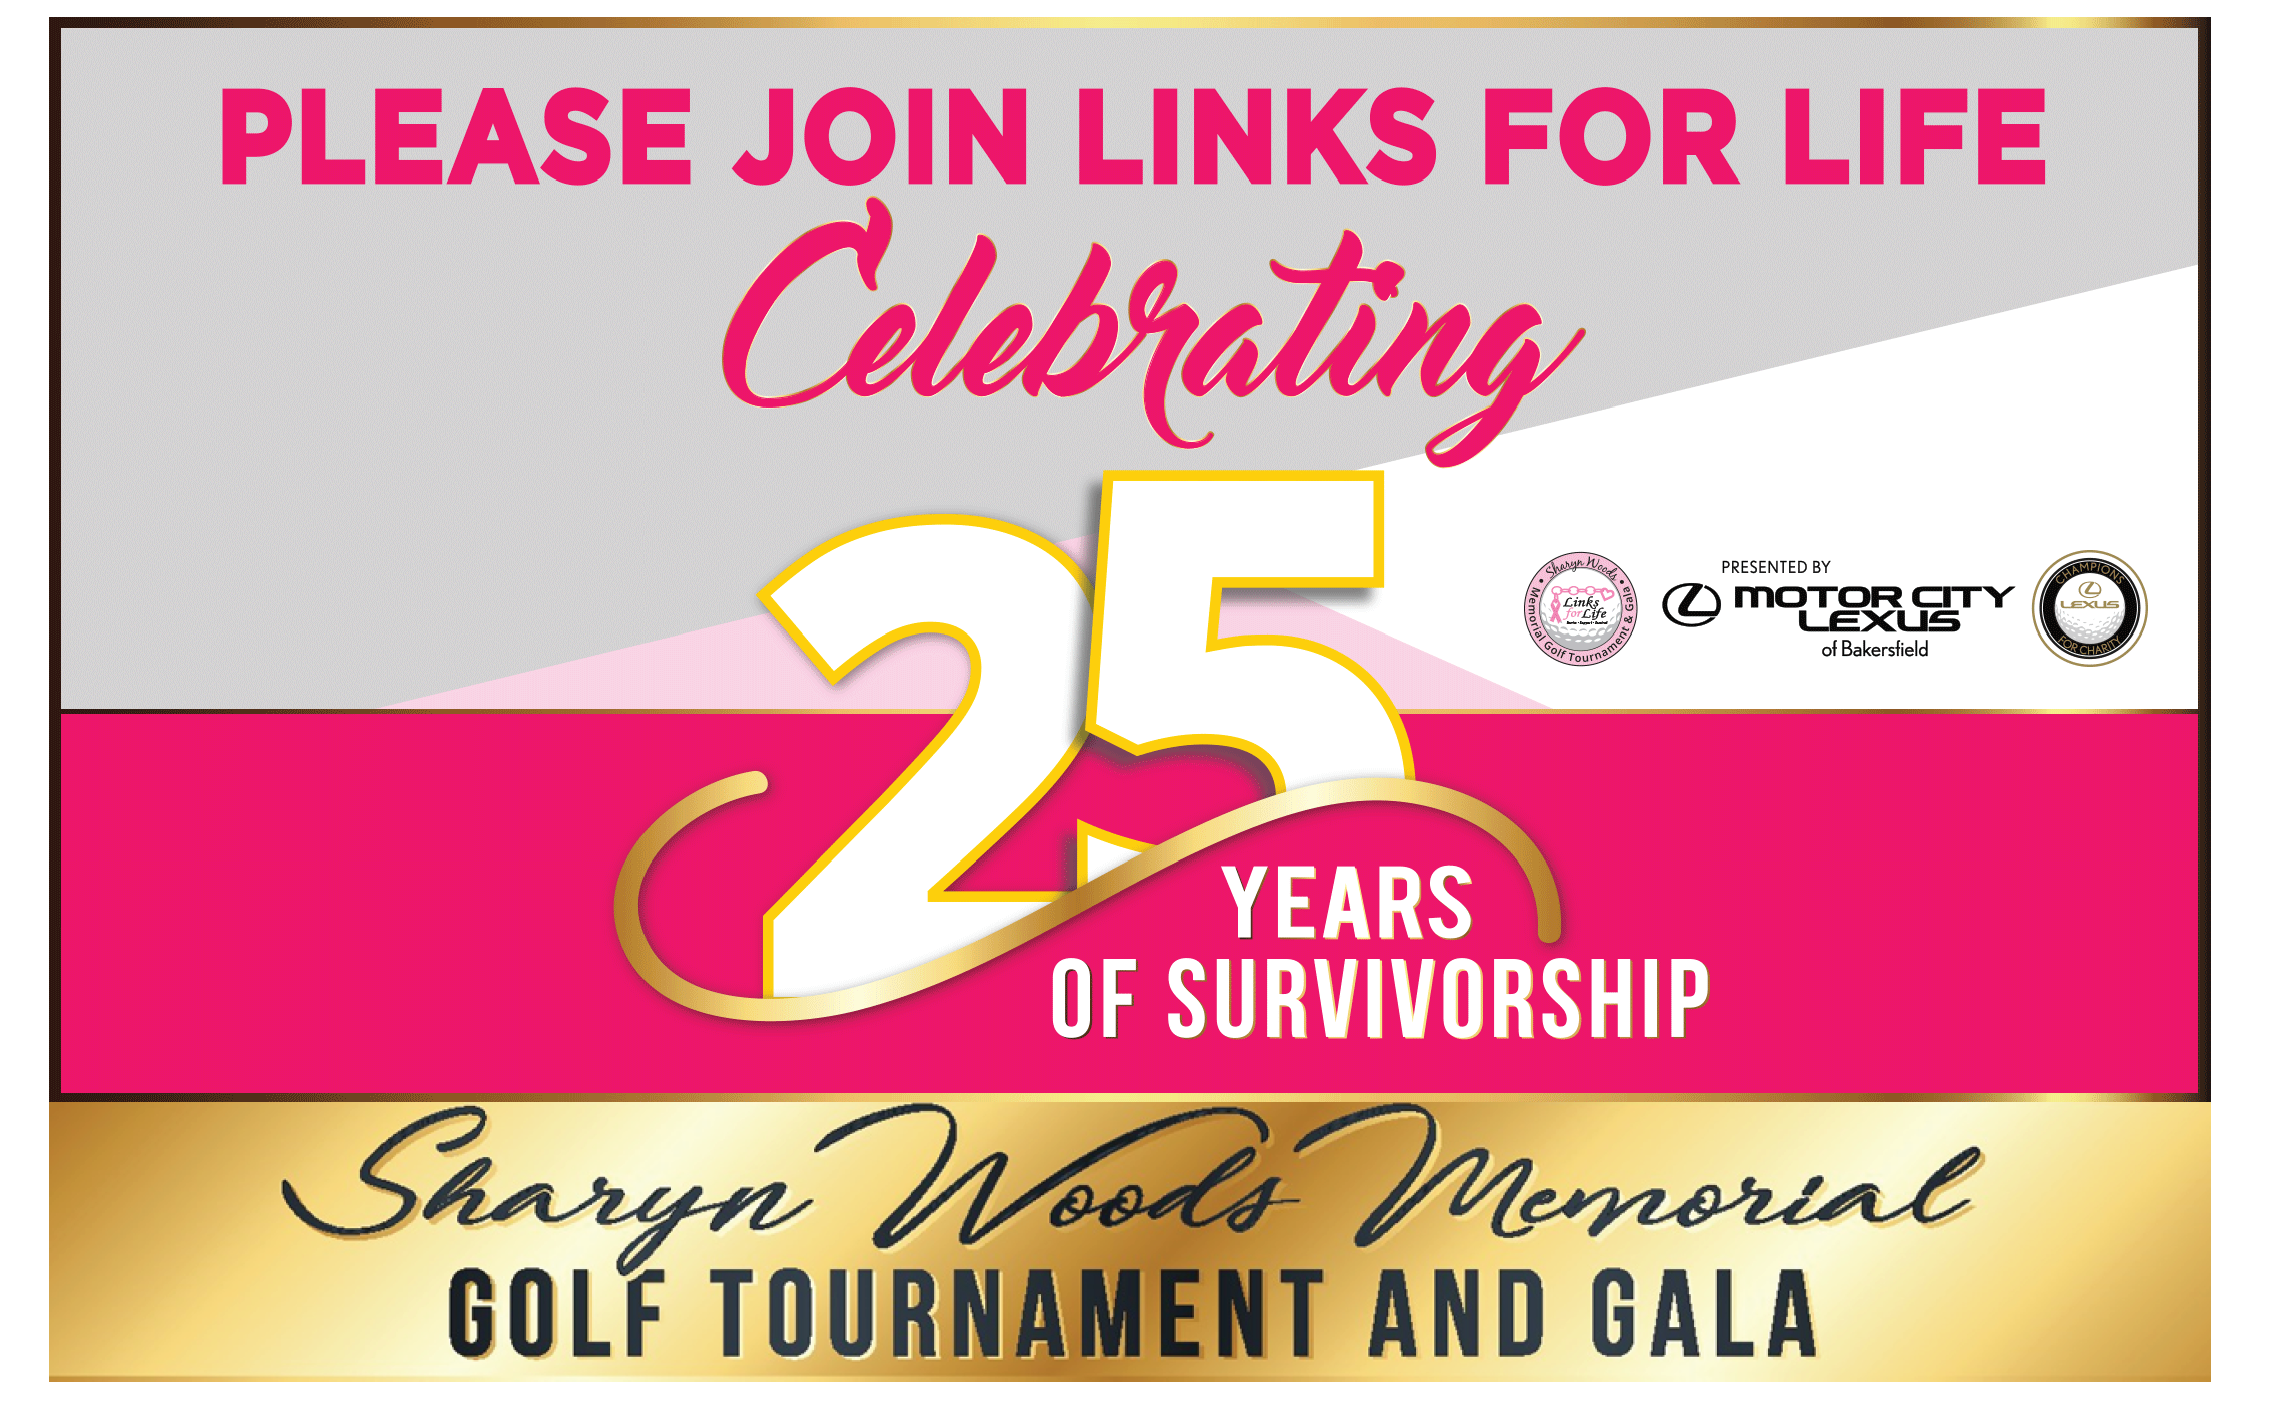 Links for Life 25th Annual Gala and Memorial Golf Tournament